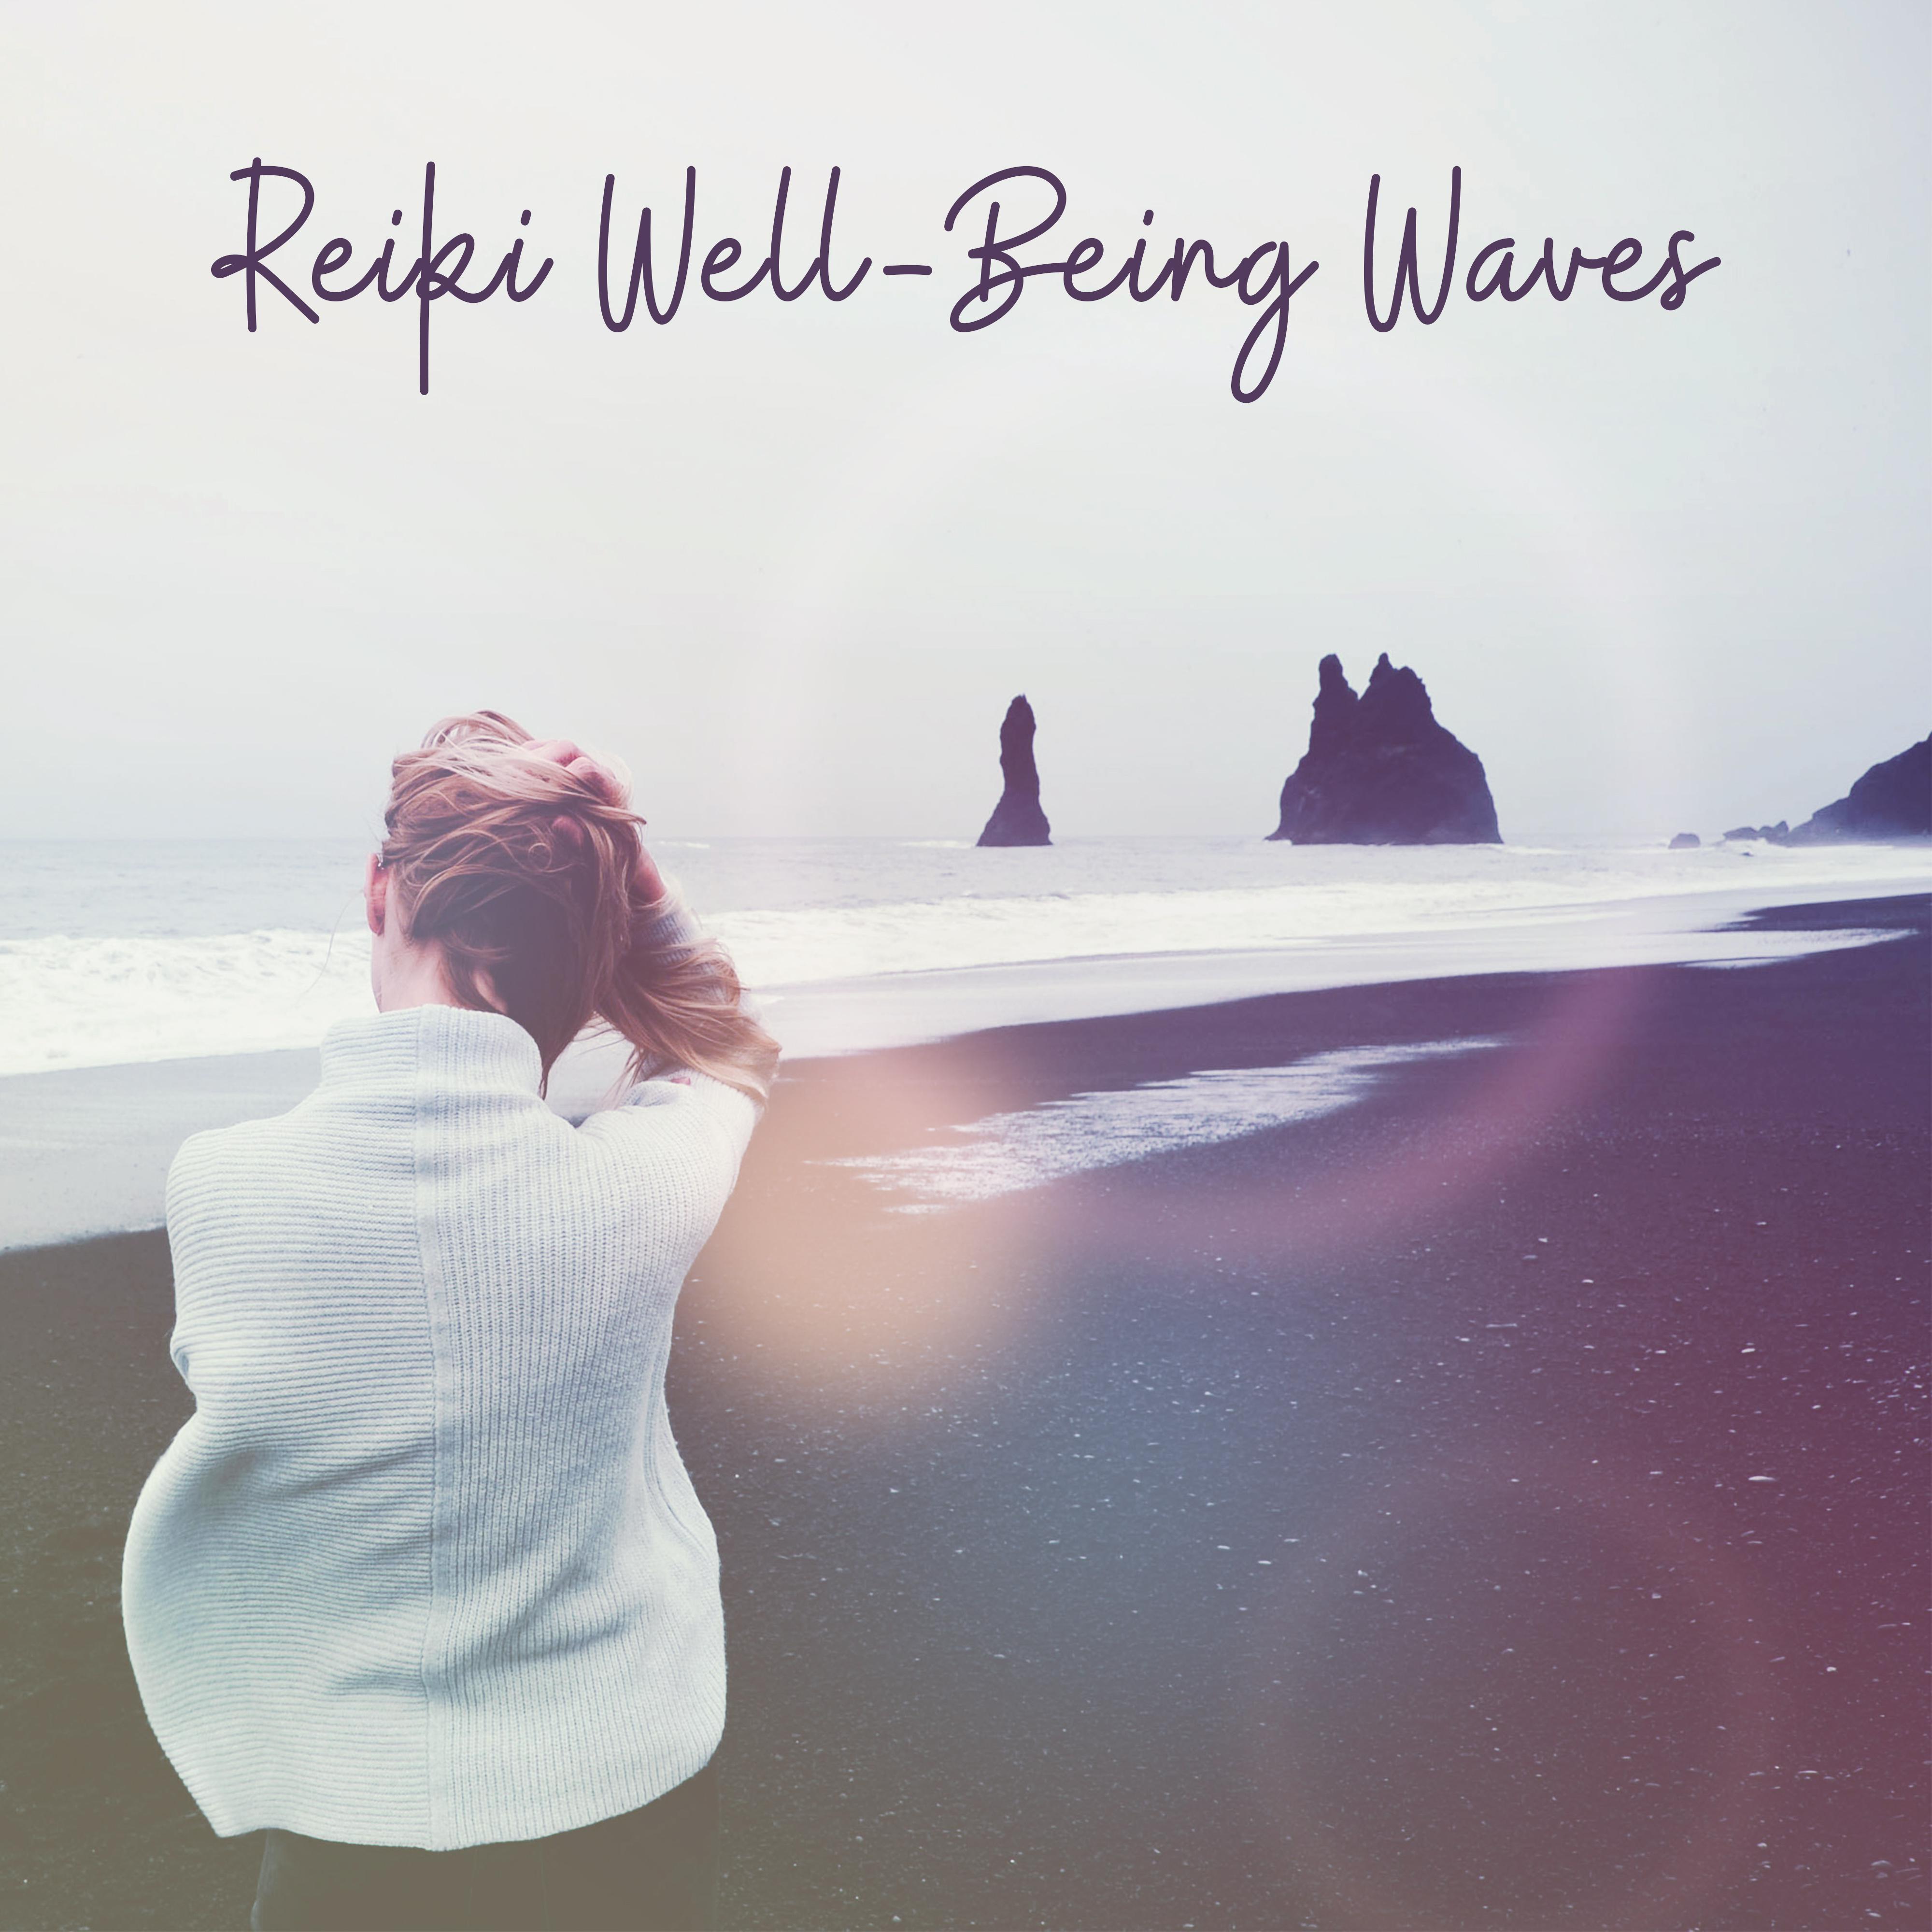 Reiki Well-Being Waves